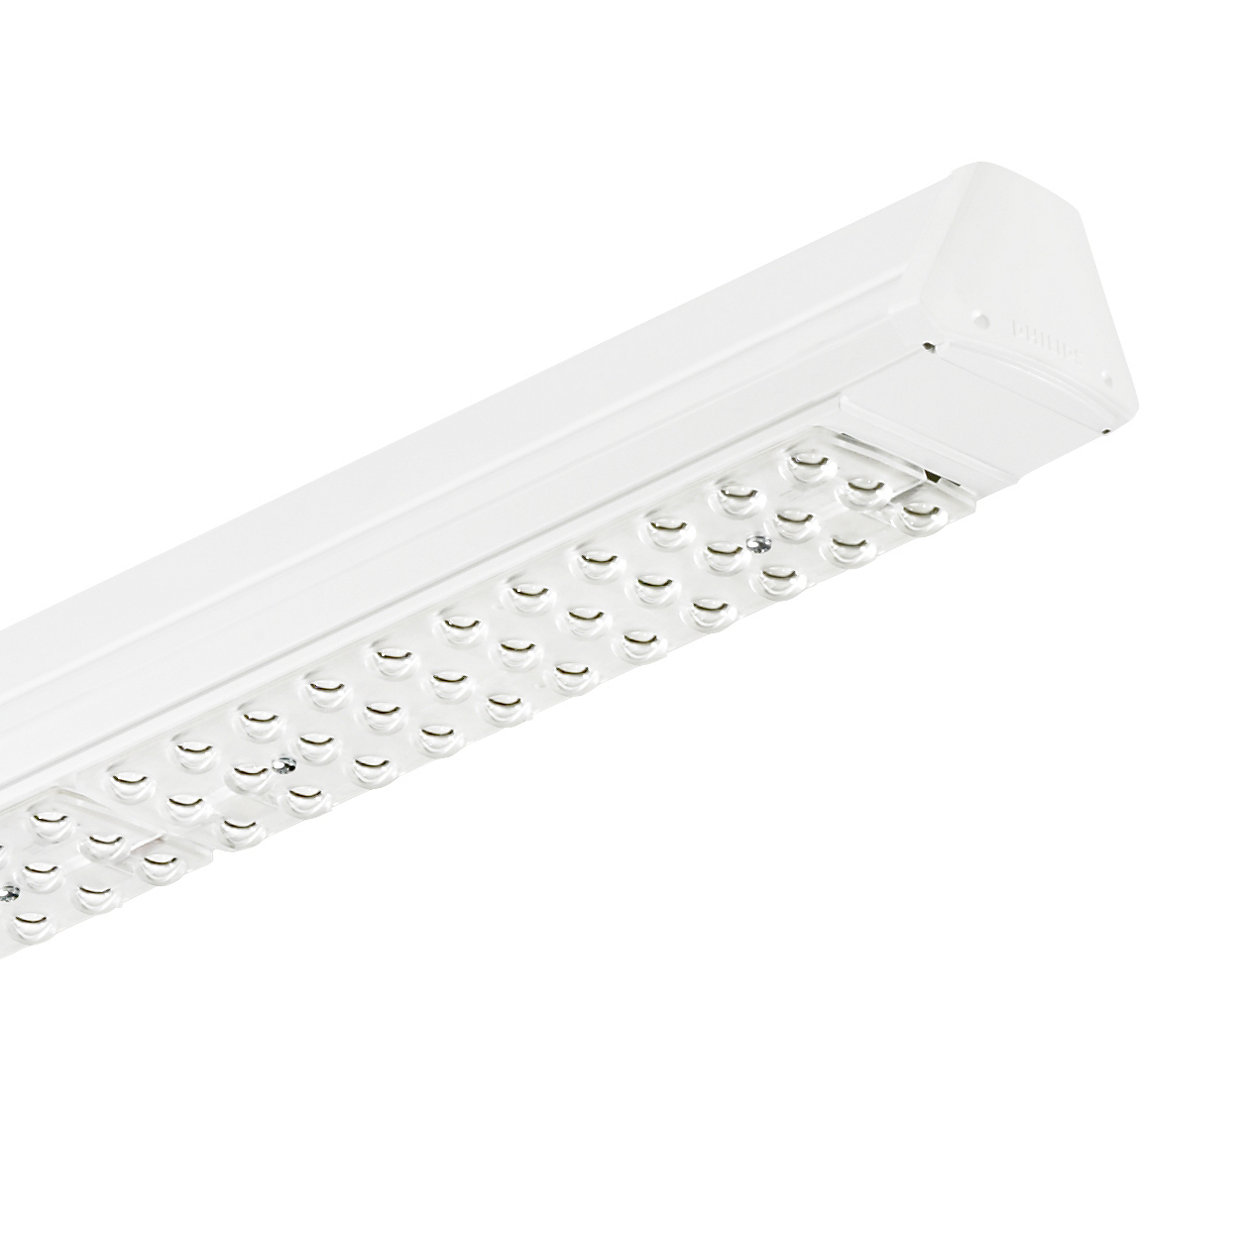 Maxos LED Industry – innovative, flexible solution delivers ideal light output